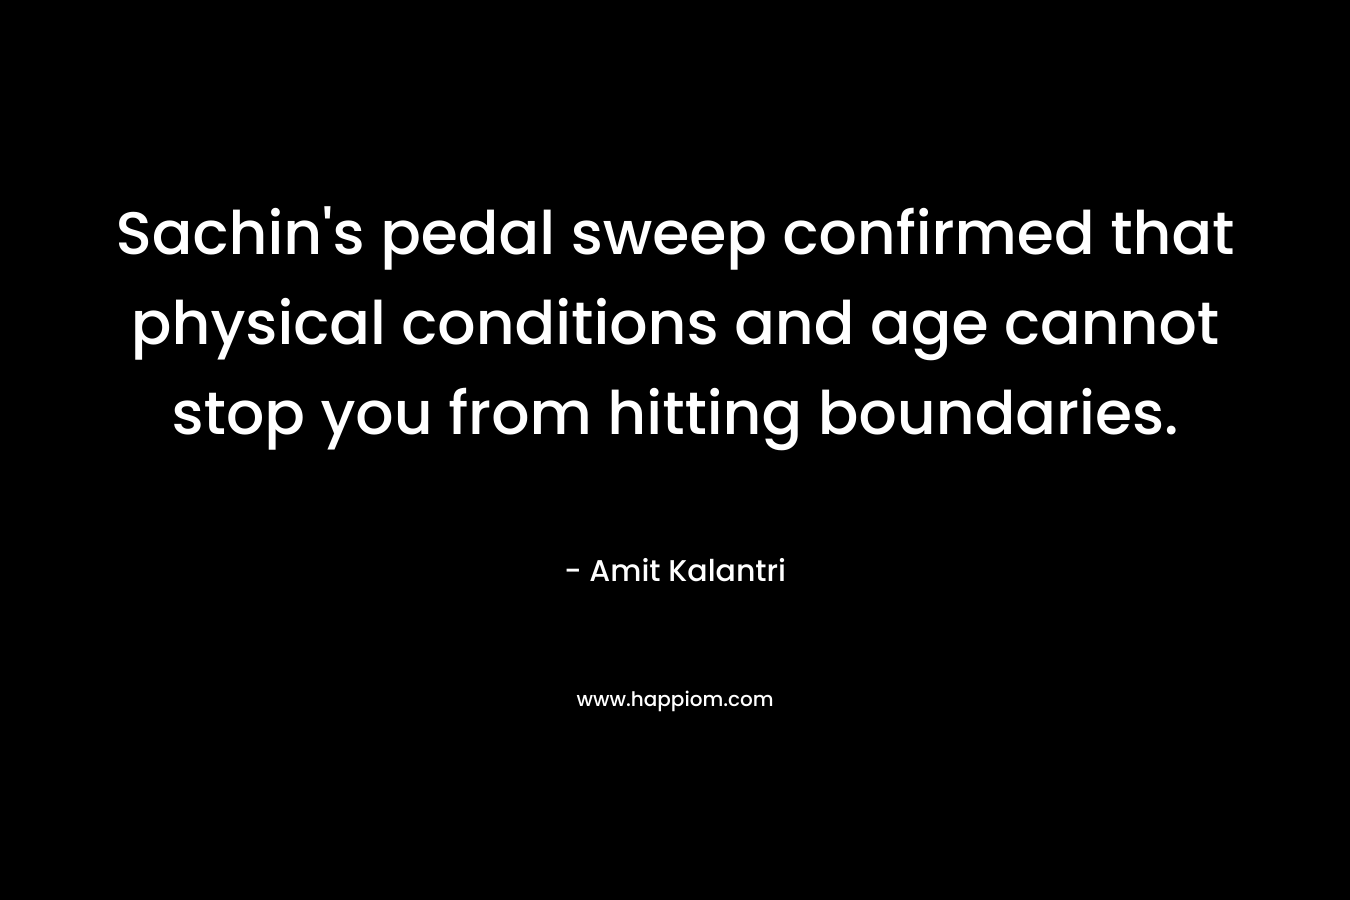 Sachin’s pedal sweep confirmed that physical conditions and age cannot stop you from hitting boundaries. – Amit Kalantri